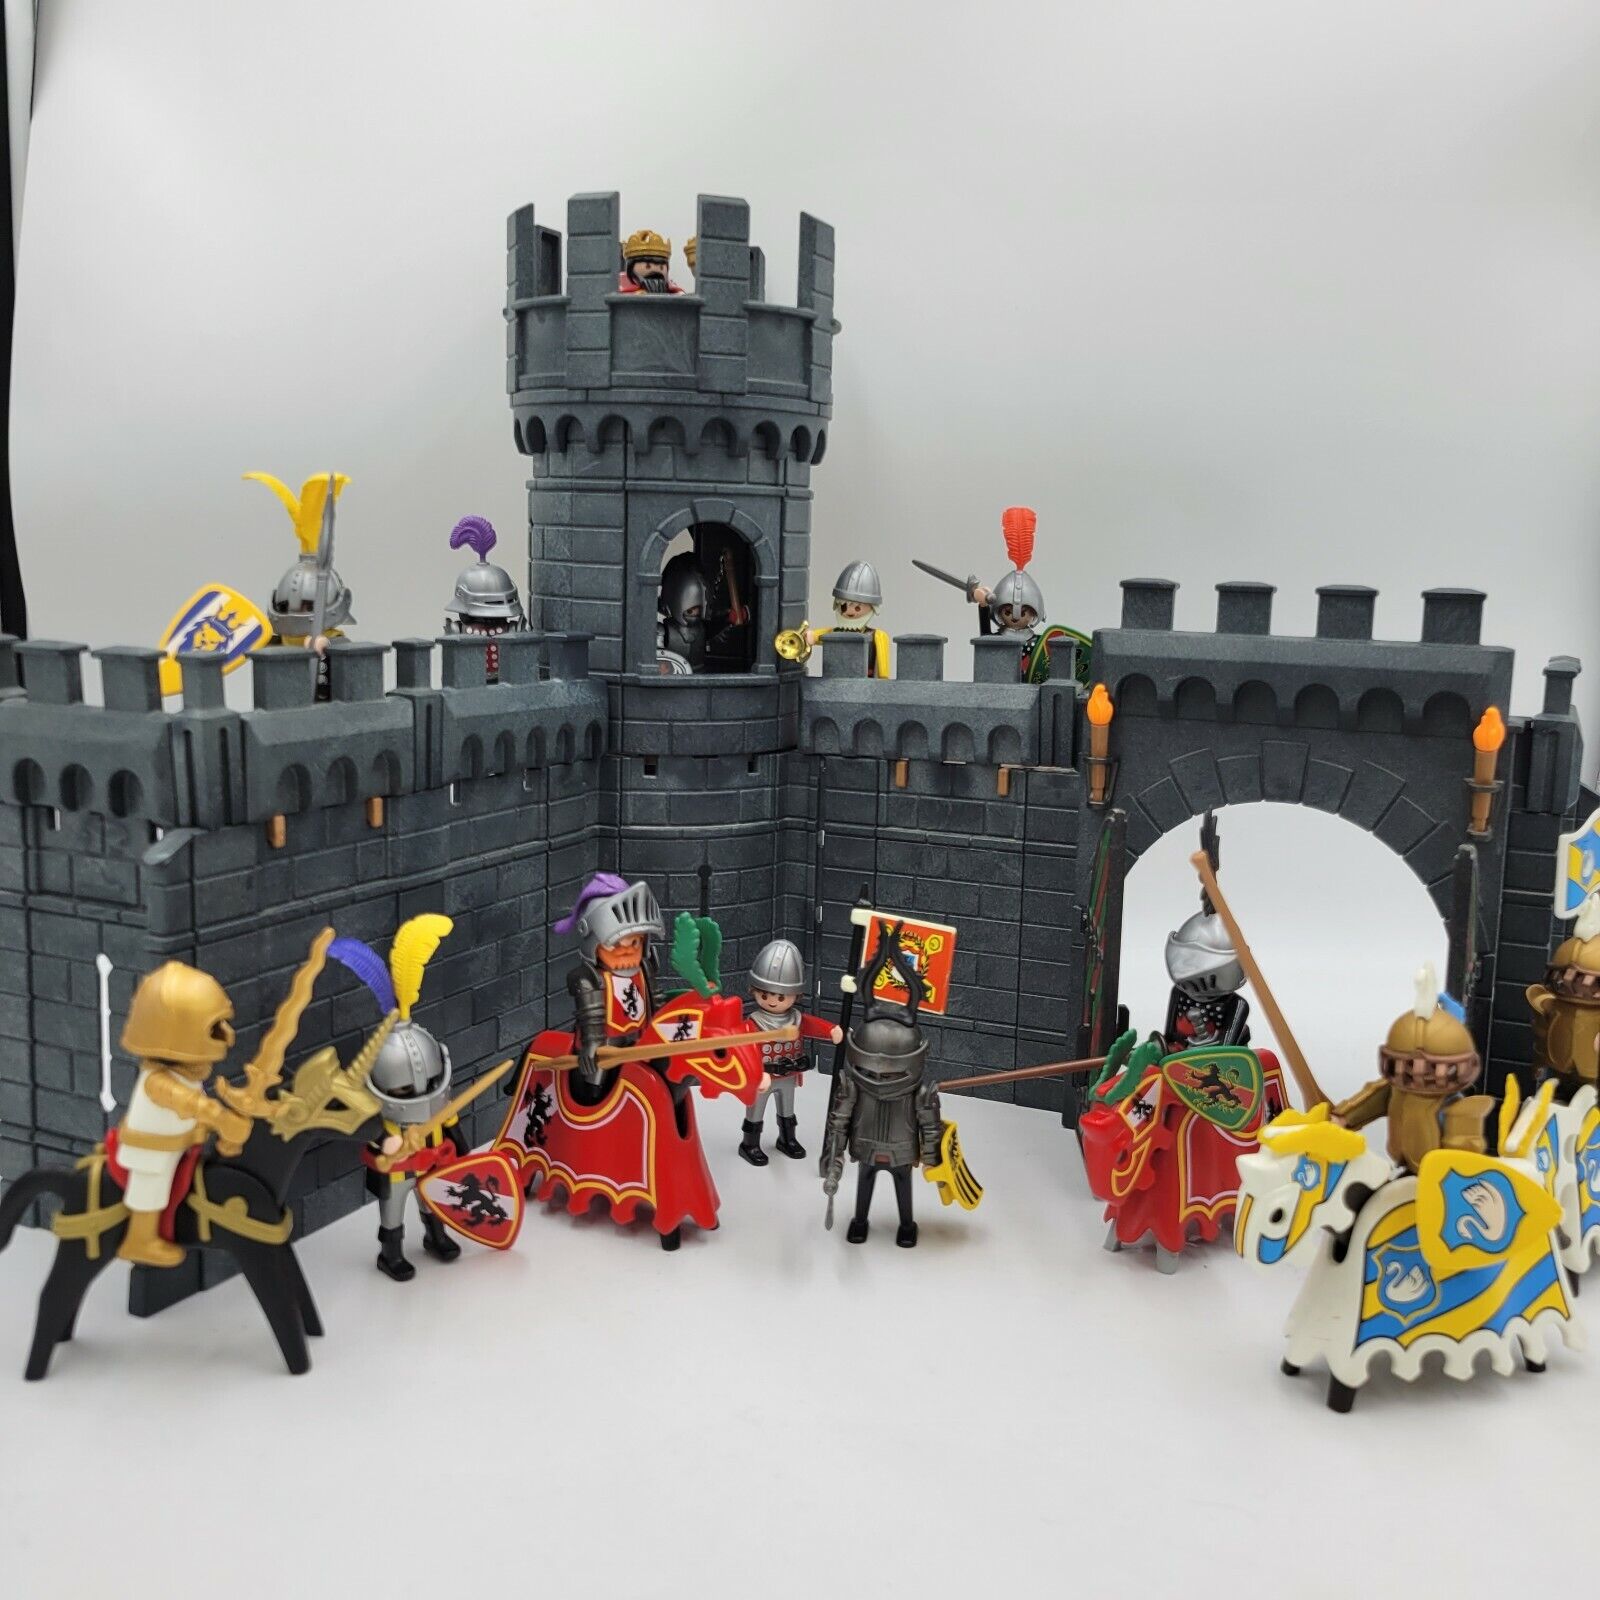 Playmobil Discount is also underway Max 75% OFF Castle with Knights Jouster Set Custom Kning